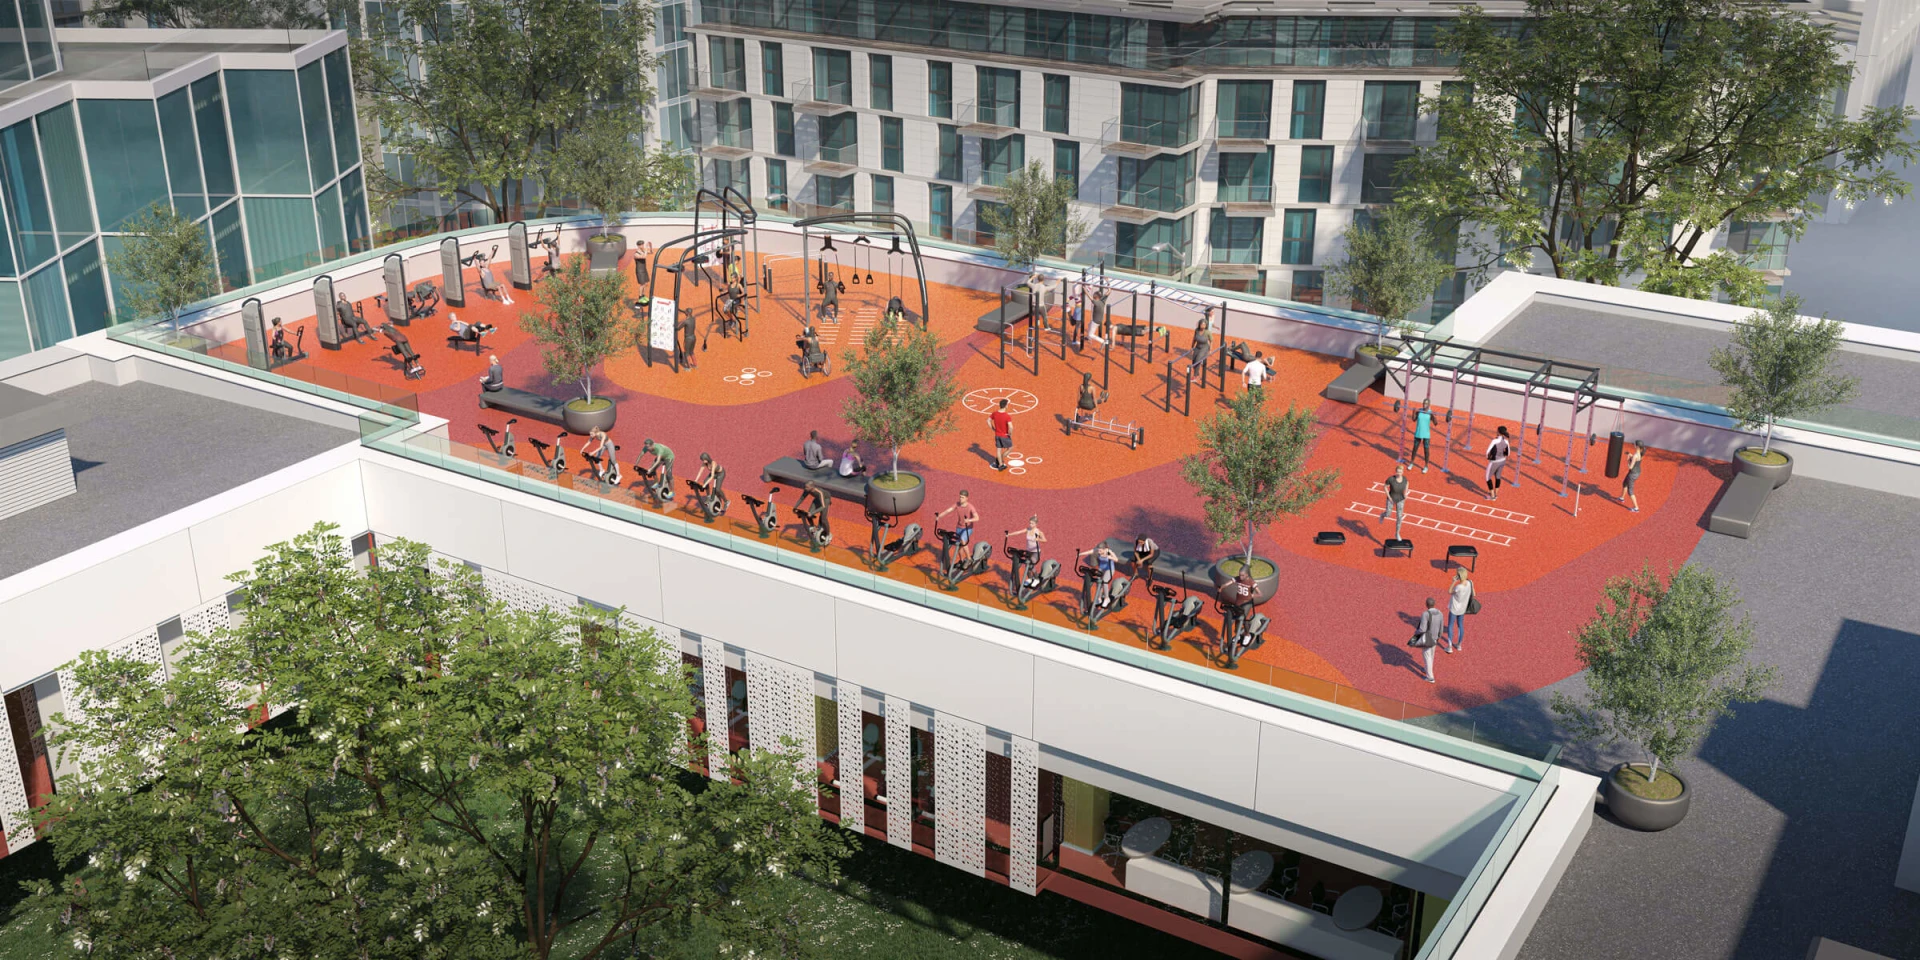 Design idea of outdoor cardio and cross training systems on a rooftop